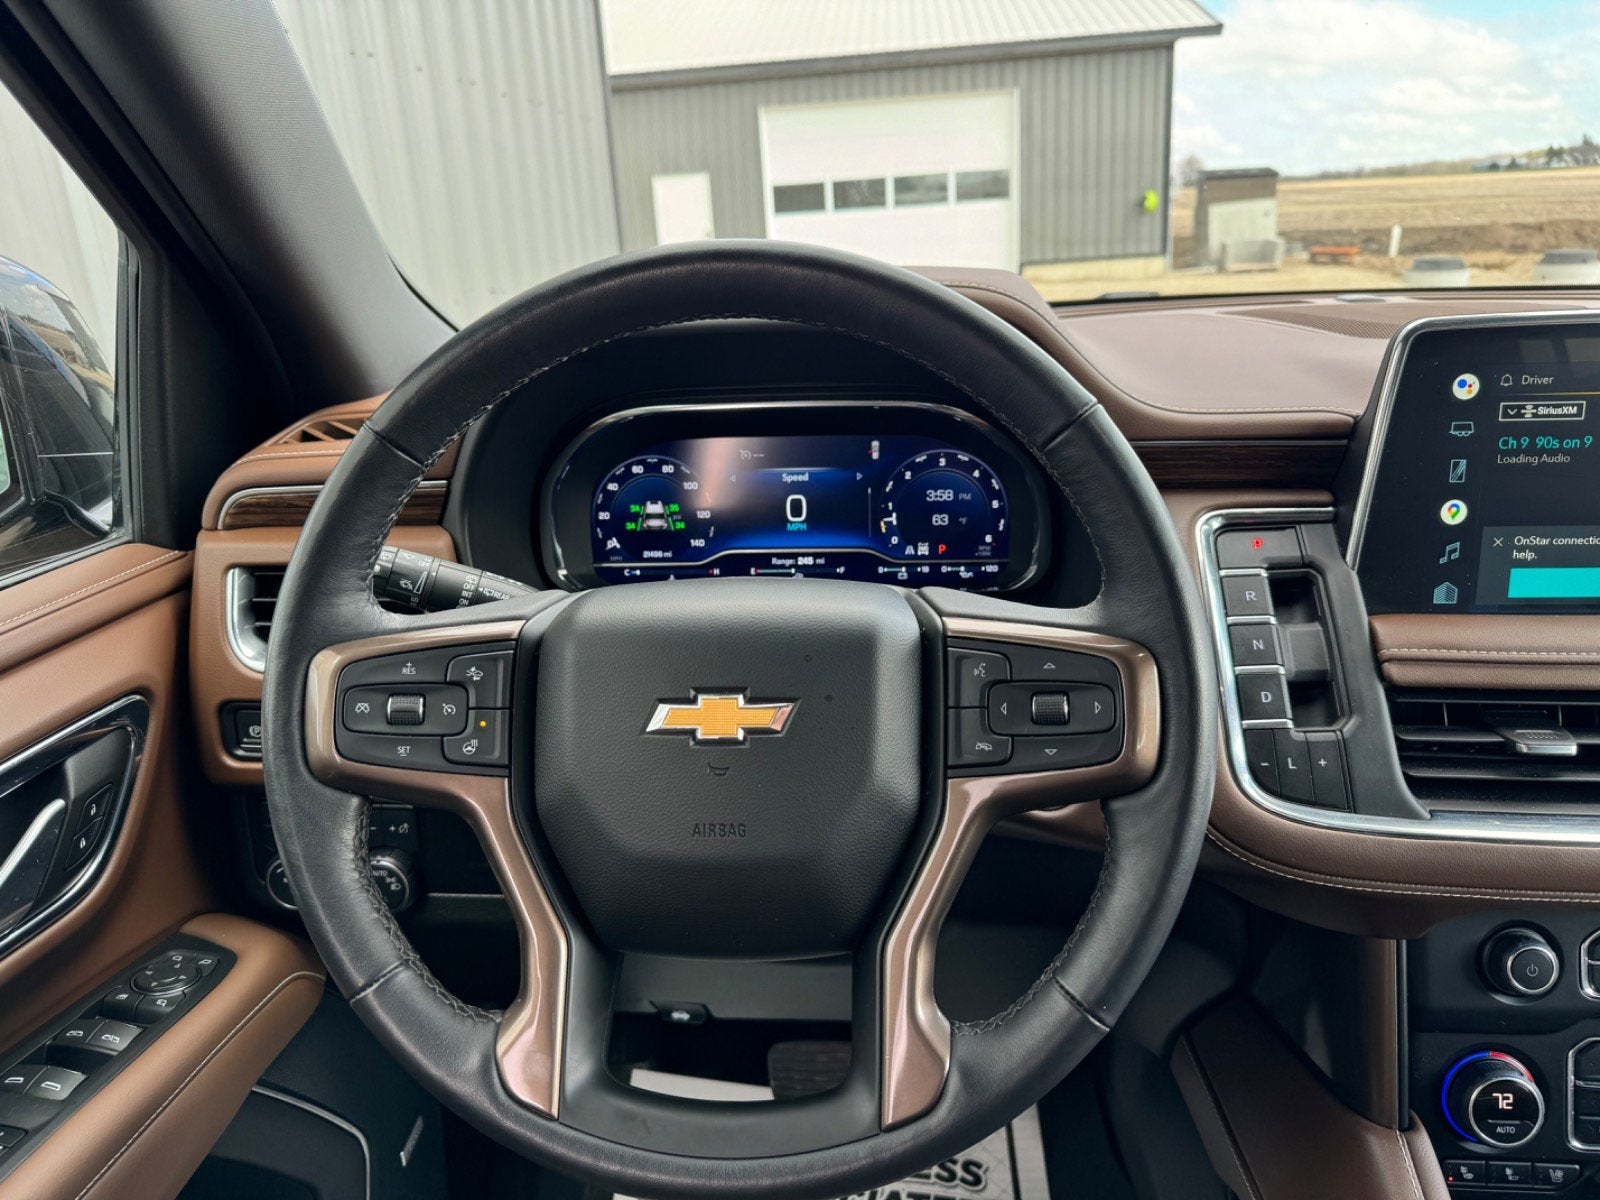 2022 Chevrolet Suburban 4WD High Country